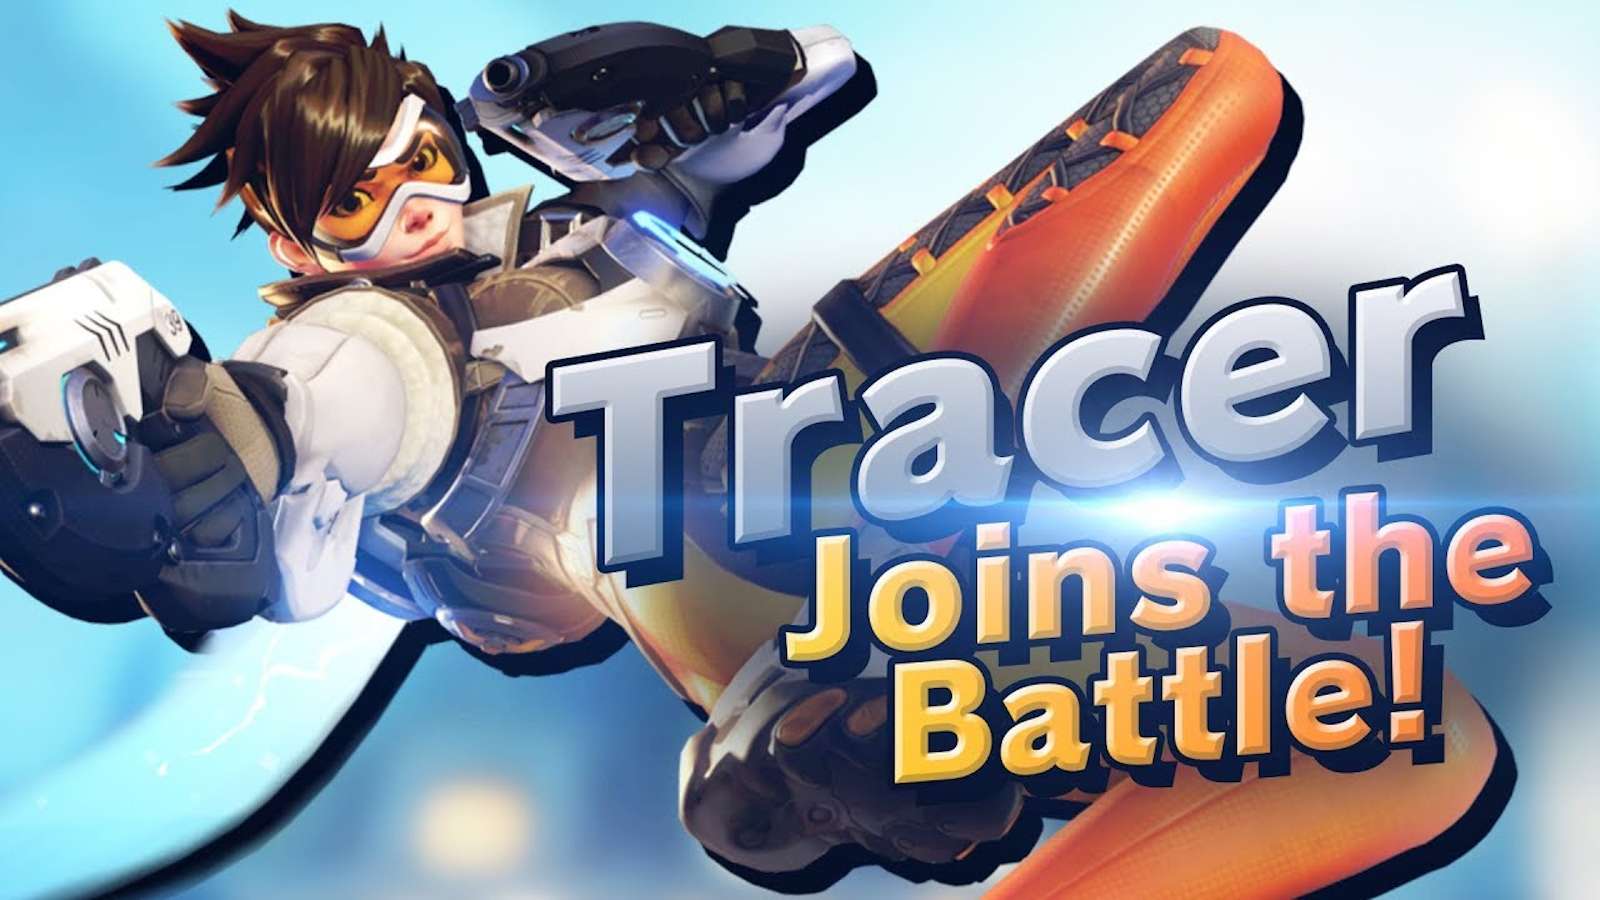 tracer from ow2 joins smash bros